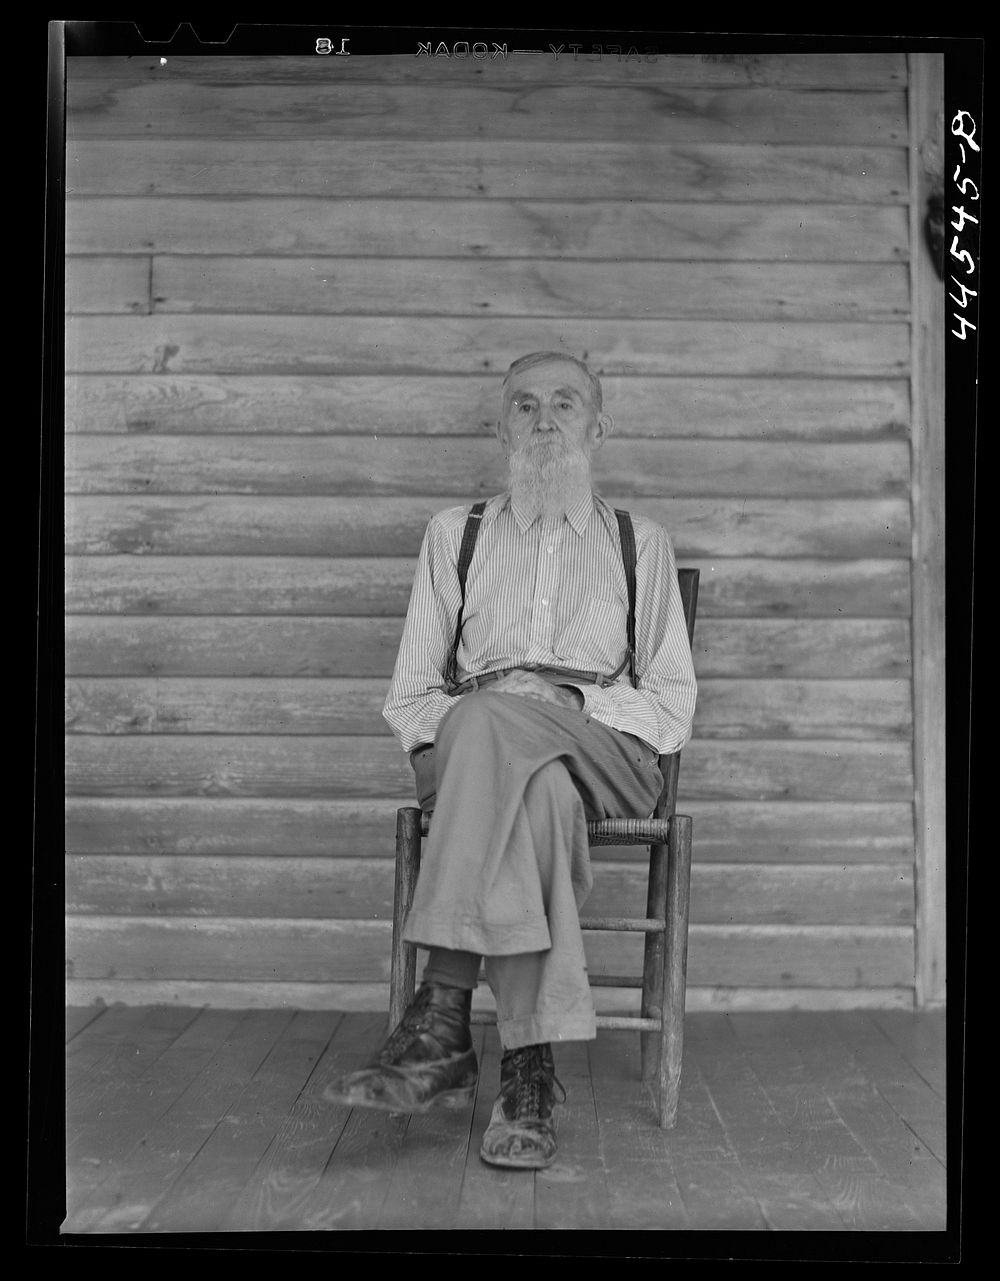 Mr. Sam Turner, one of the oldest residents of Greene County. Near Liberty, Georgia. Sourced from the Library of Congress.